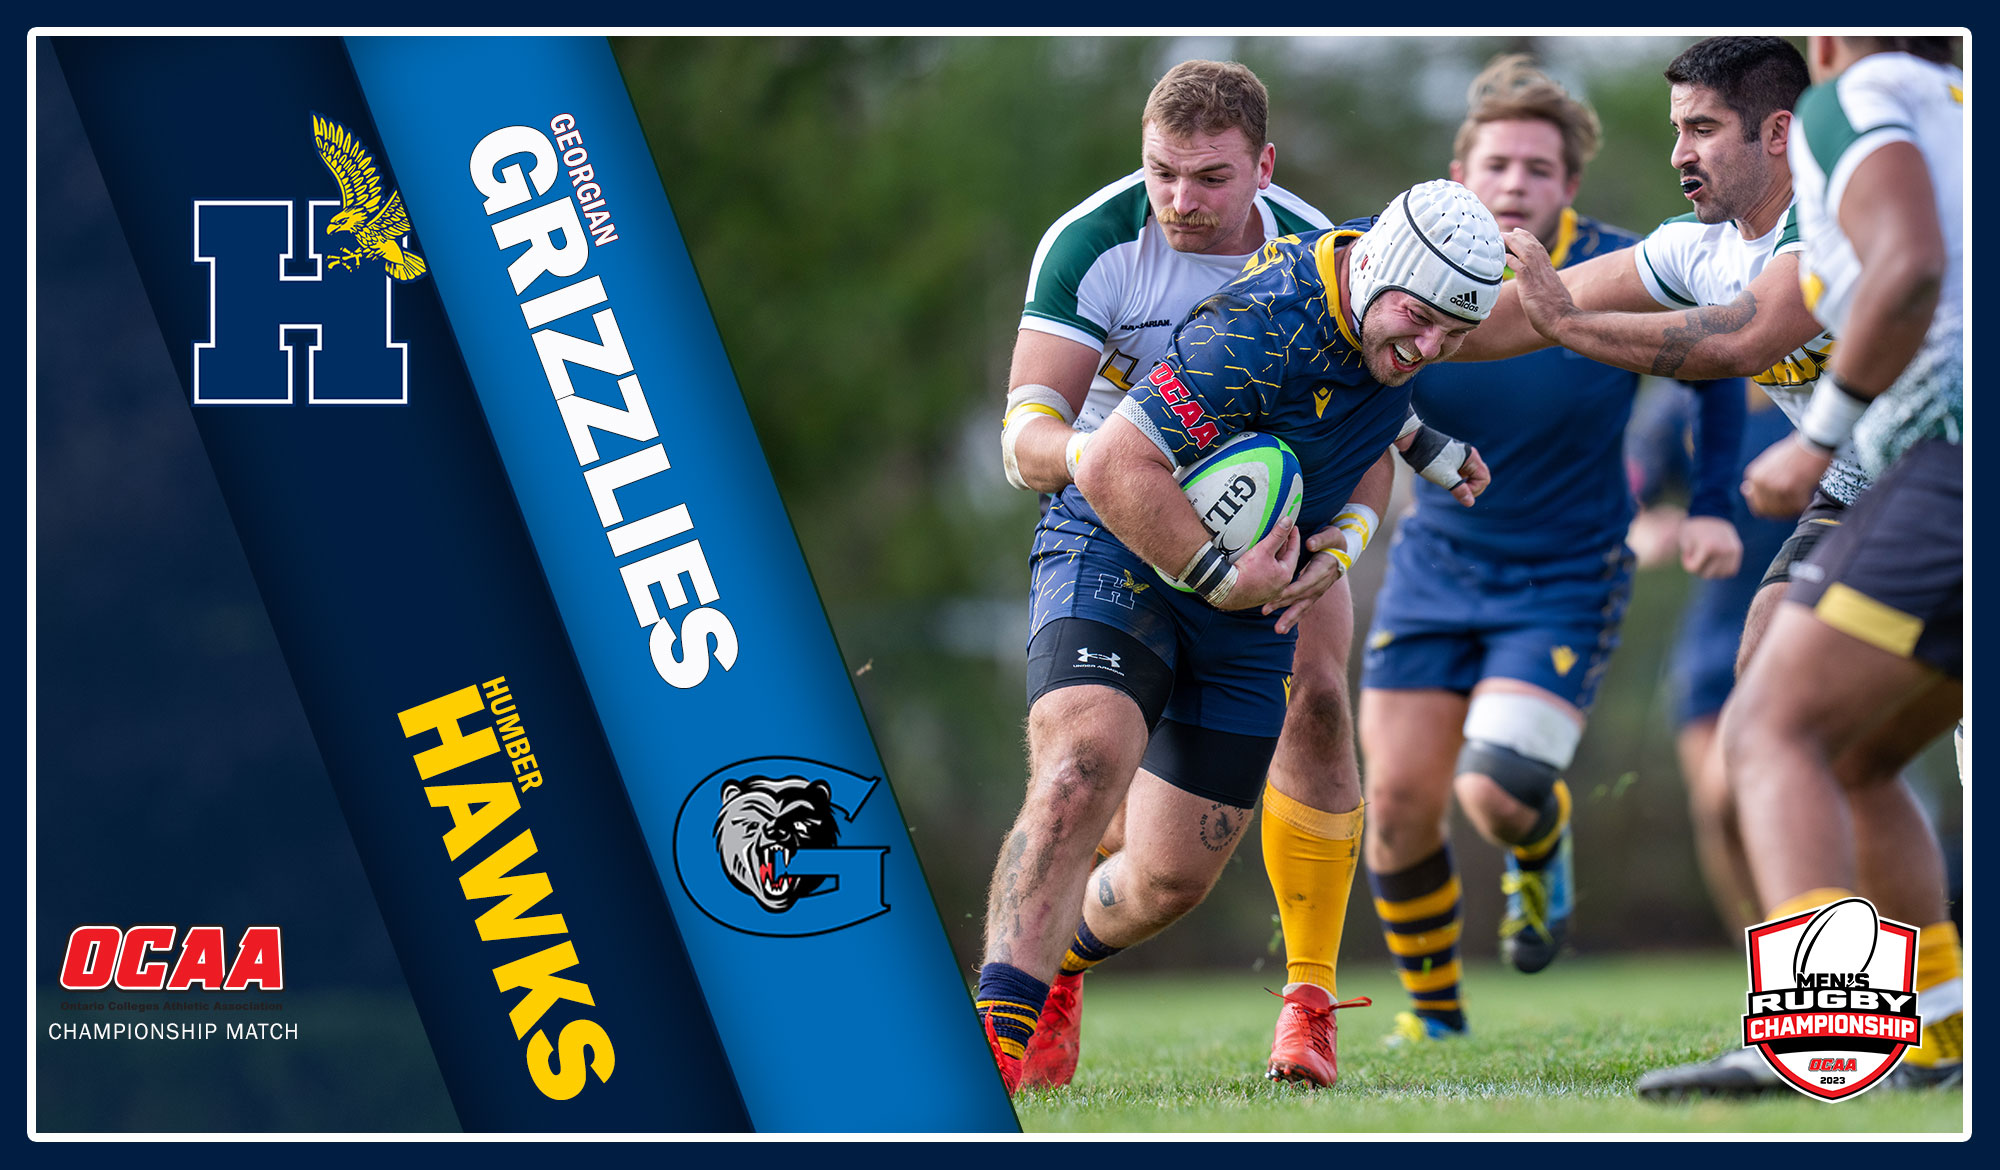 PREVIEW: Men's Rugby heading to OCAA title match